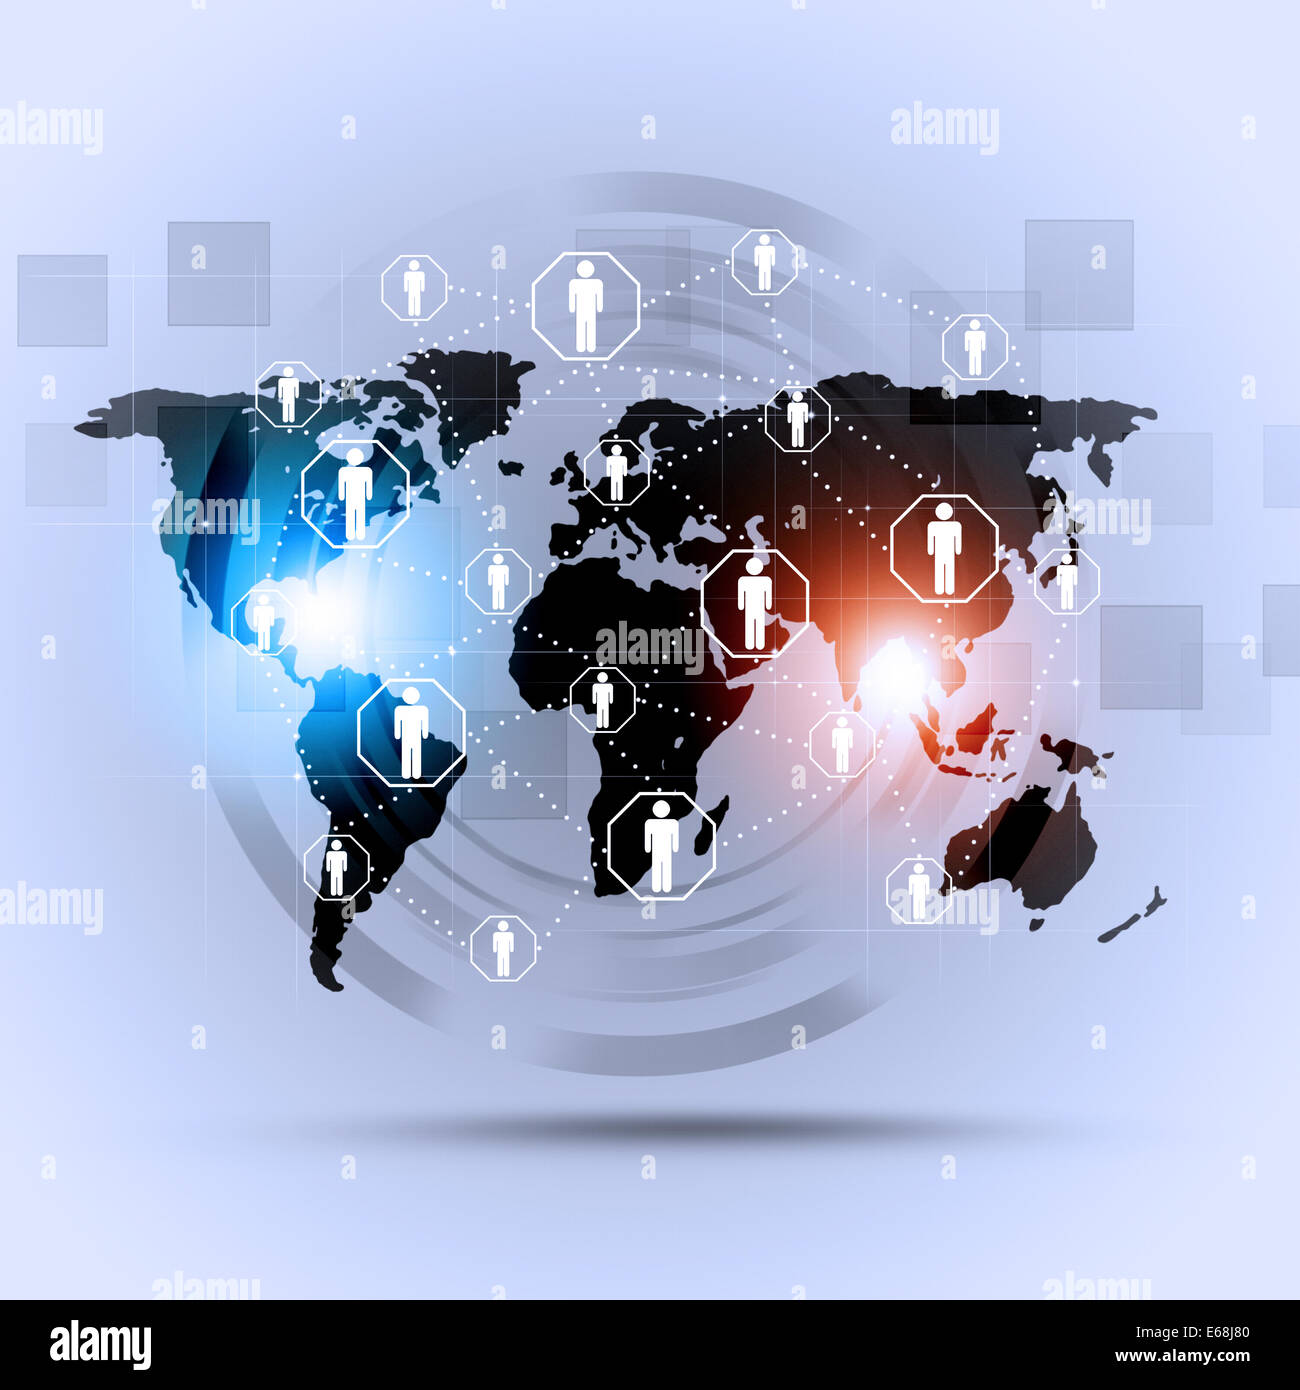 concept interface of global web connections and communications Stock Photo